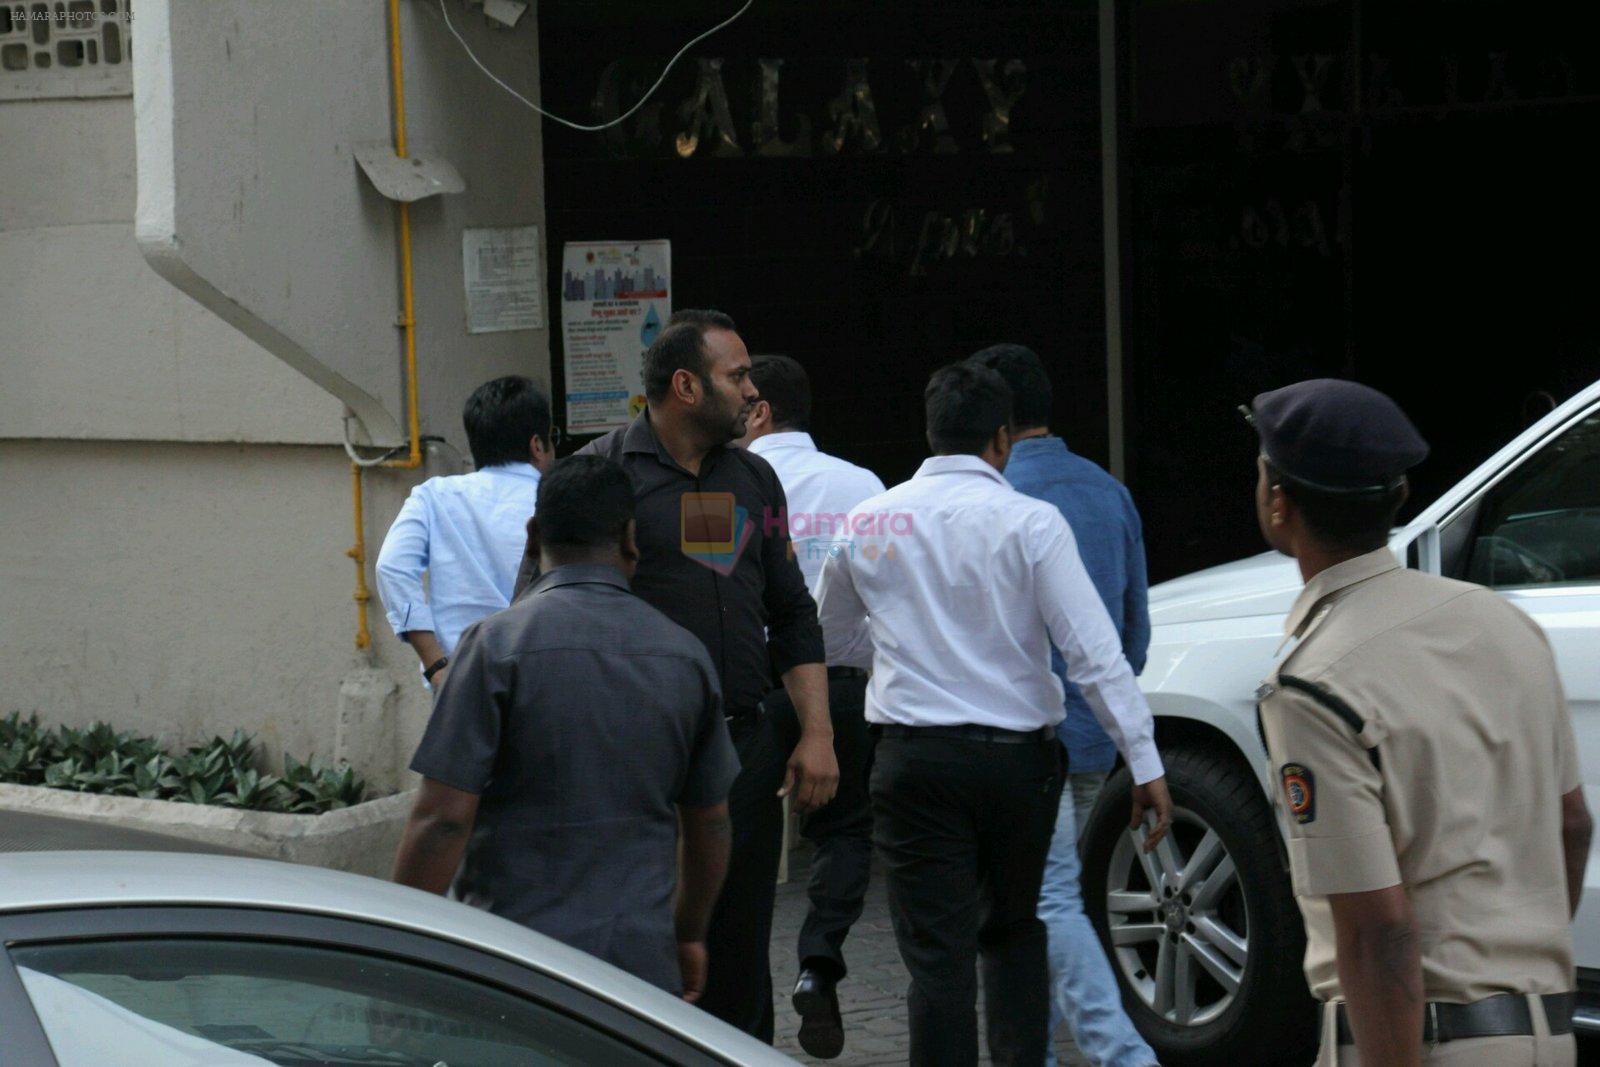 Salman Khan arrives in Mumbai after being acquitted in the Arms case